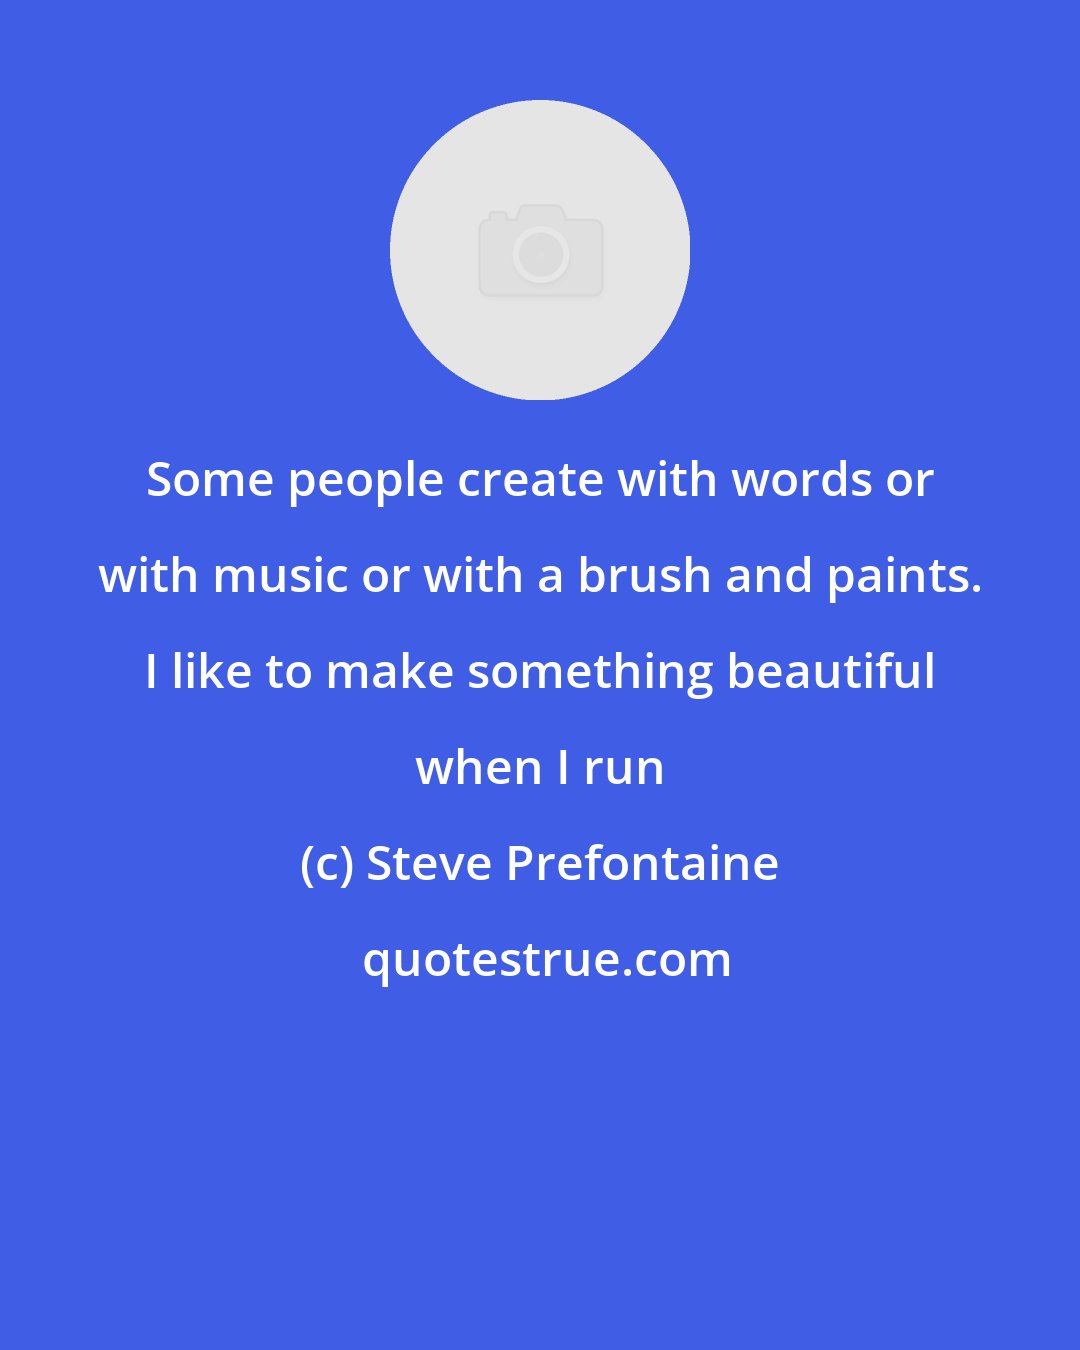 Steve Prefontaine: Some people create with words or with music or with a brush and paints. I like to make something beautiful when I run